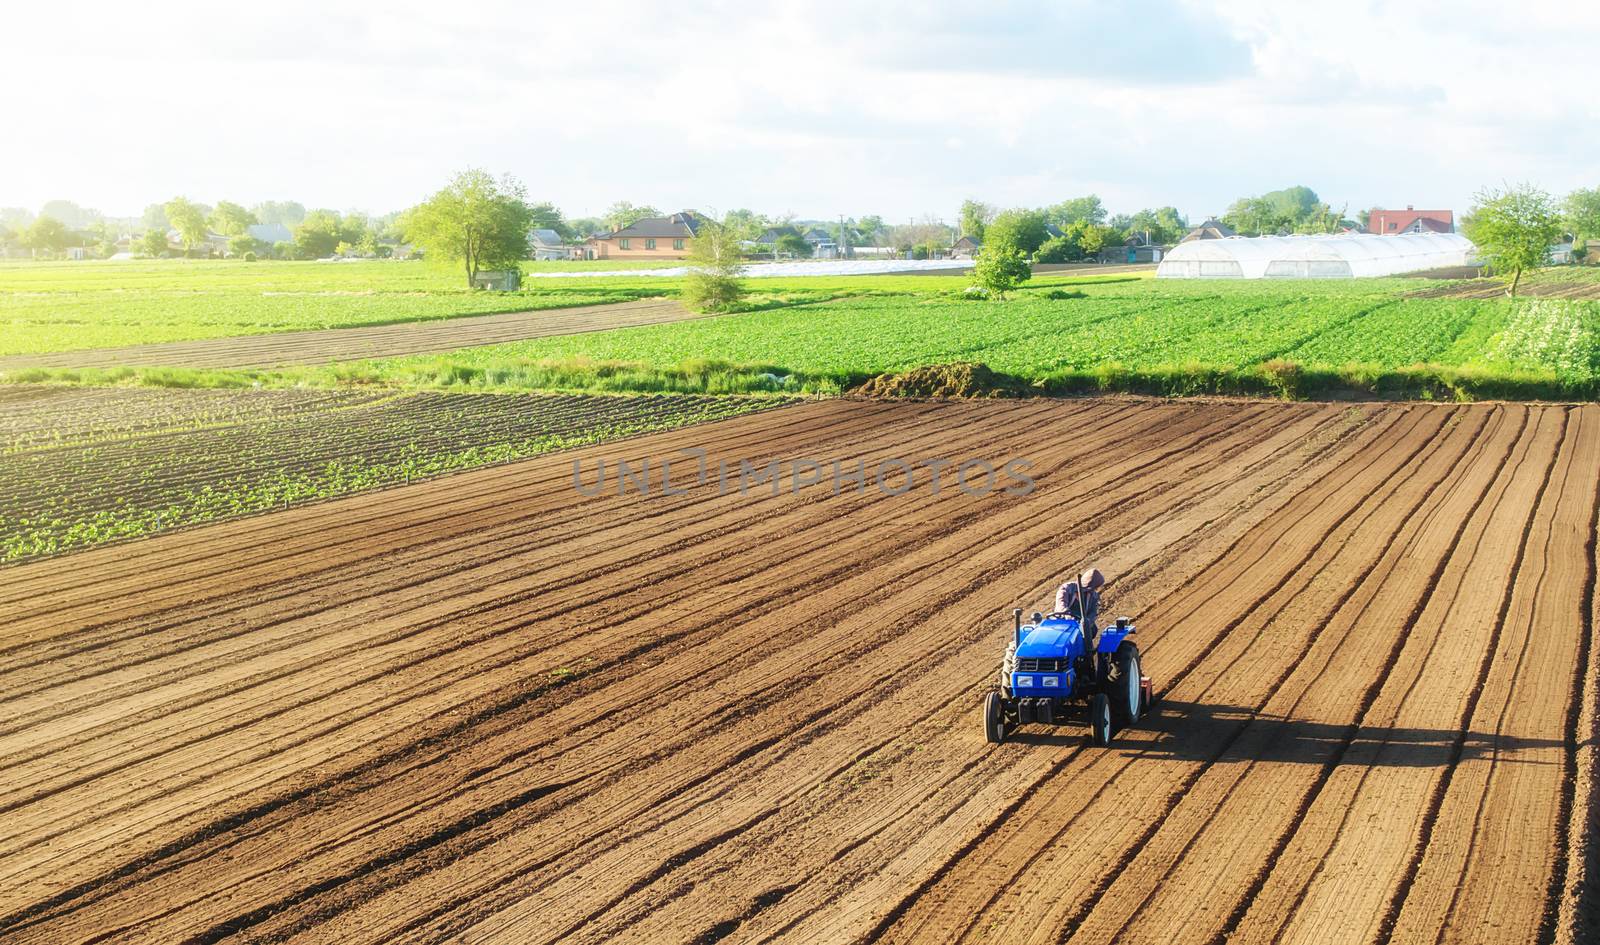 A farmer on a tractor processes a farm field. Cultivating land soil for further planting. Loosening, improving soil quality. Food production on vegetable plantations. Farming and agriculture. by iLixe48